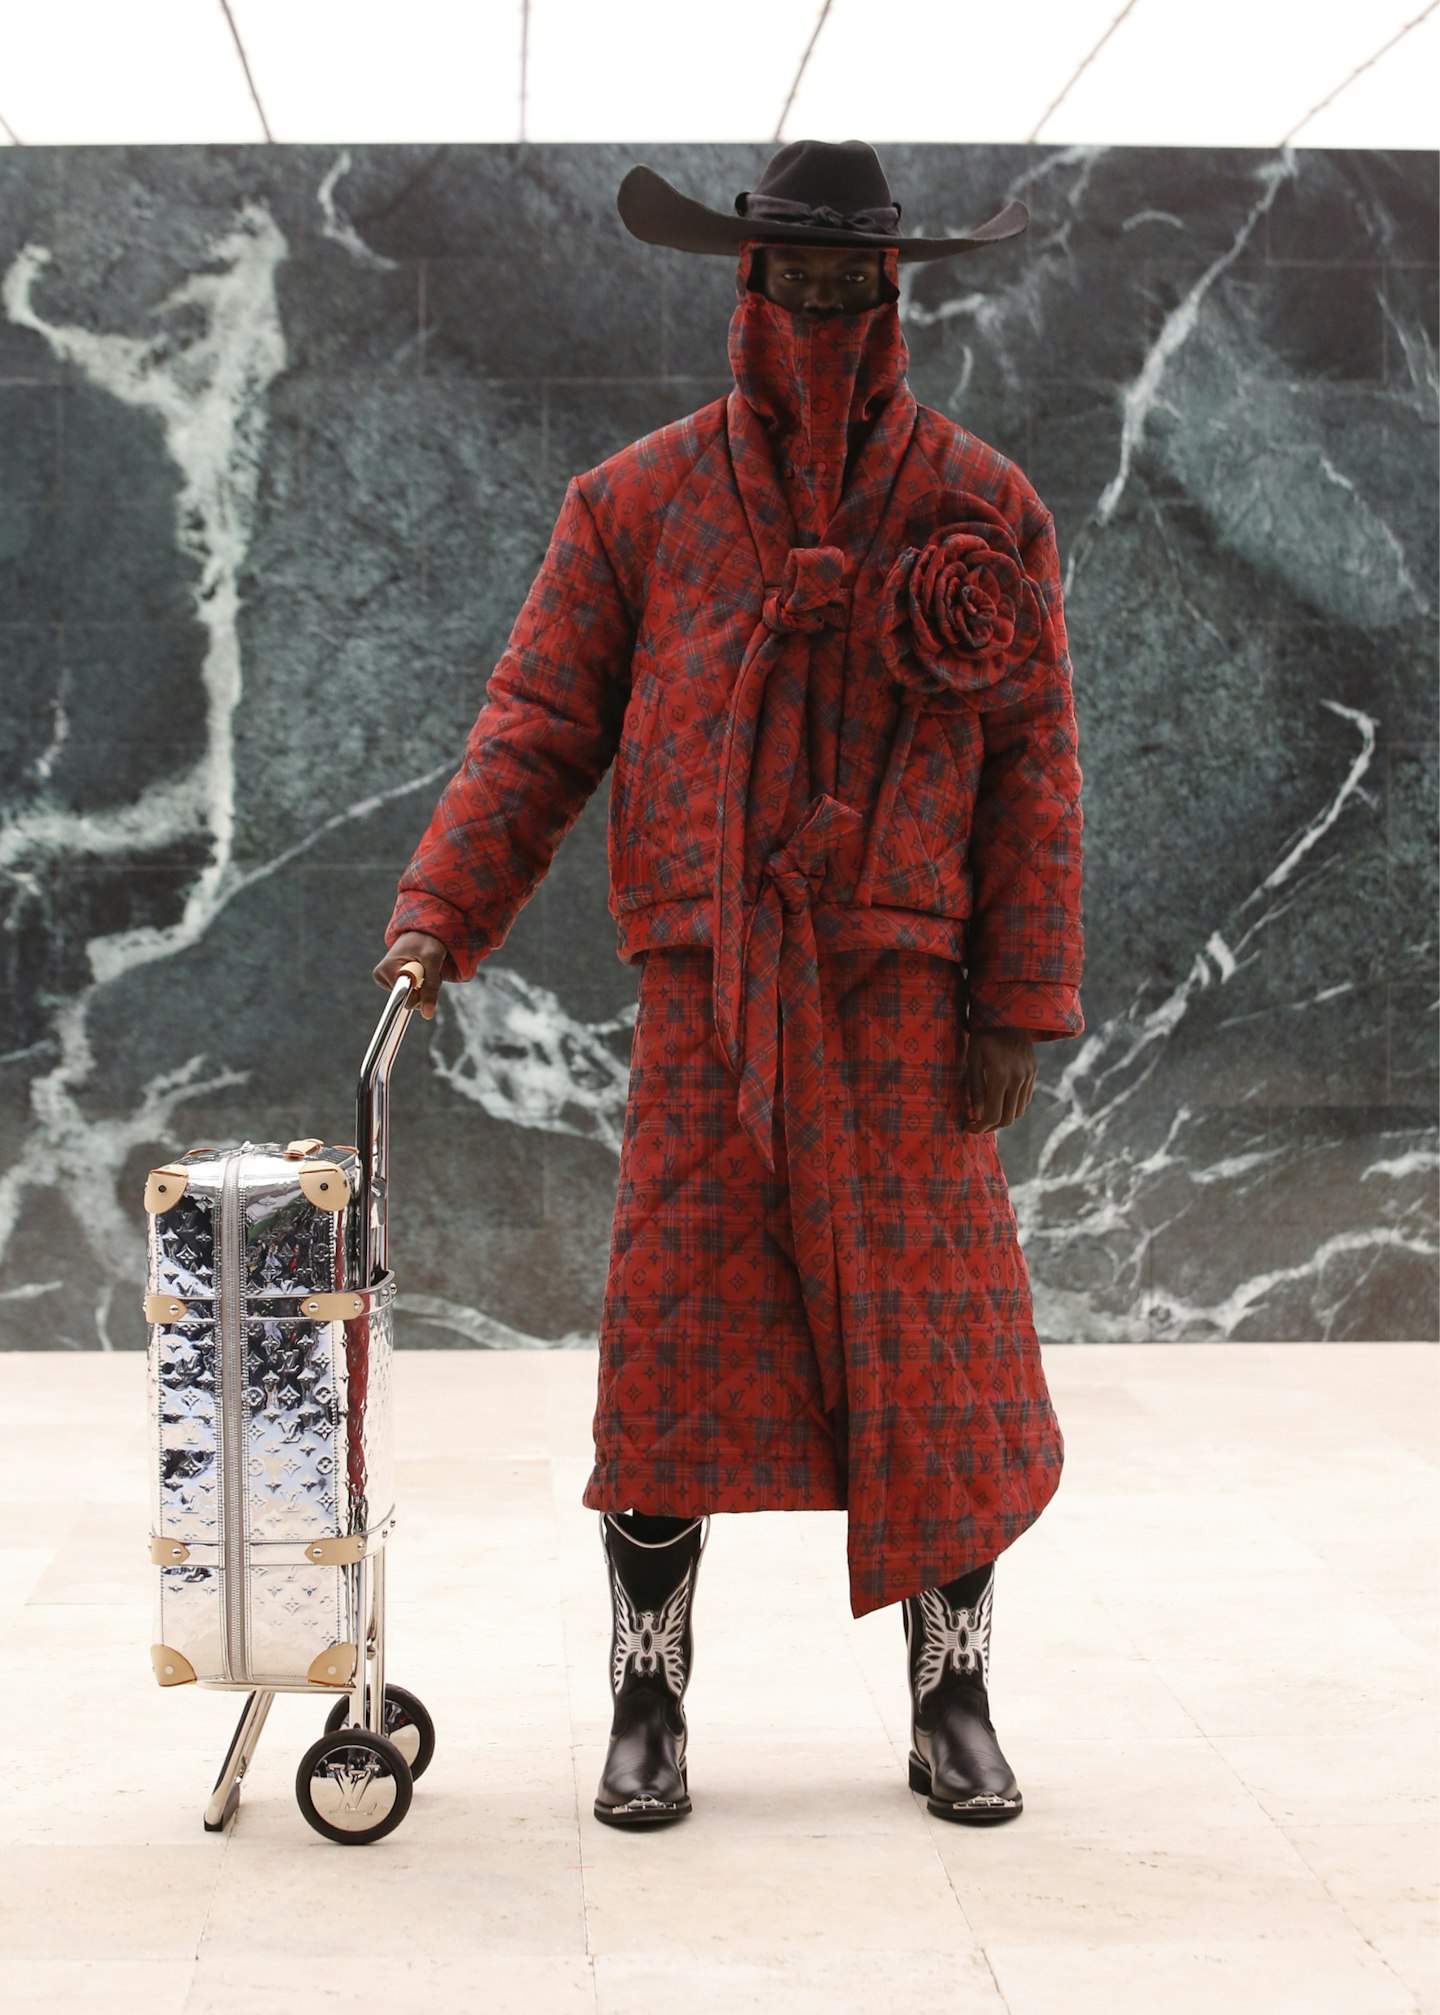 Louis Vuitton FW21: 10 must-haves from Virgil Abloh's new collection